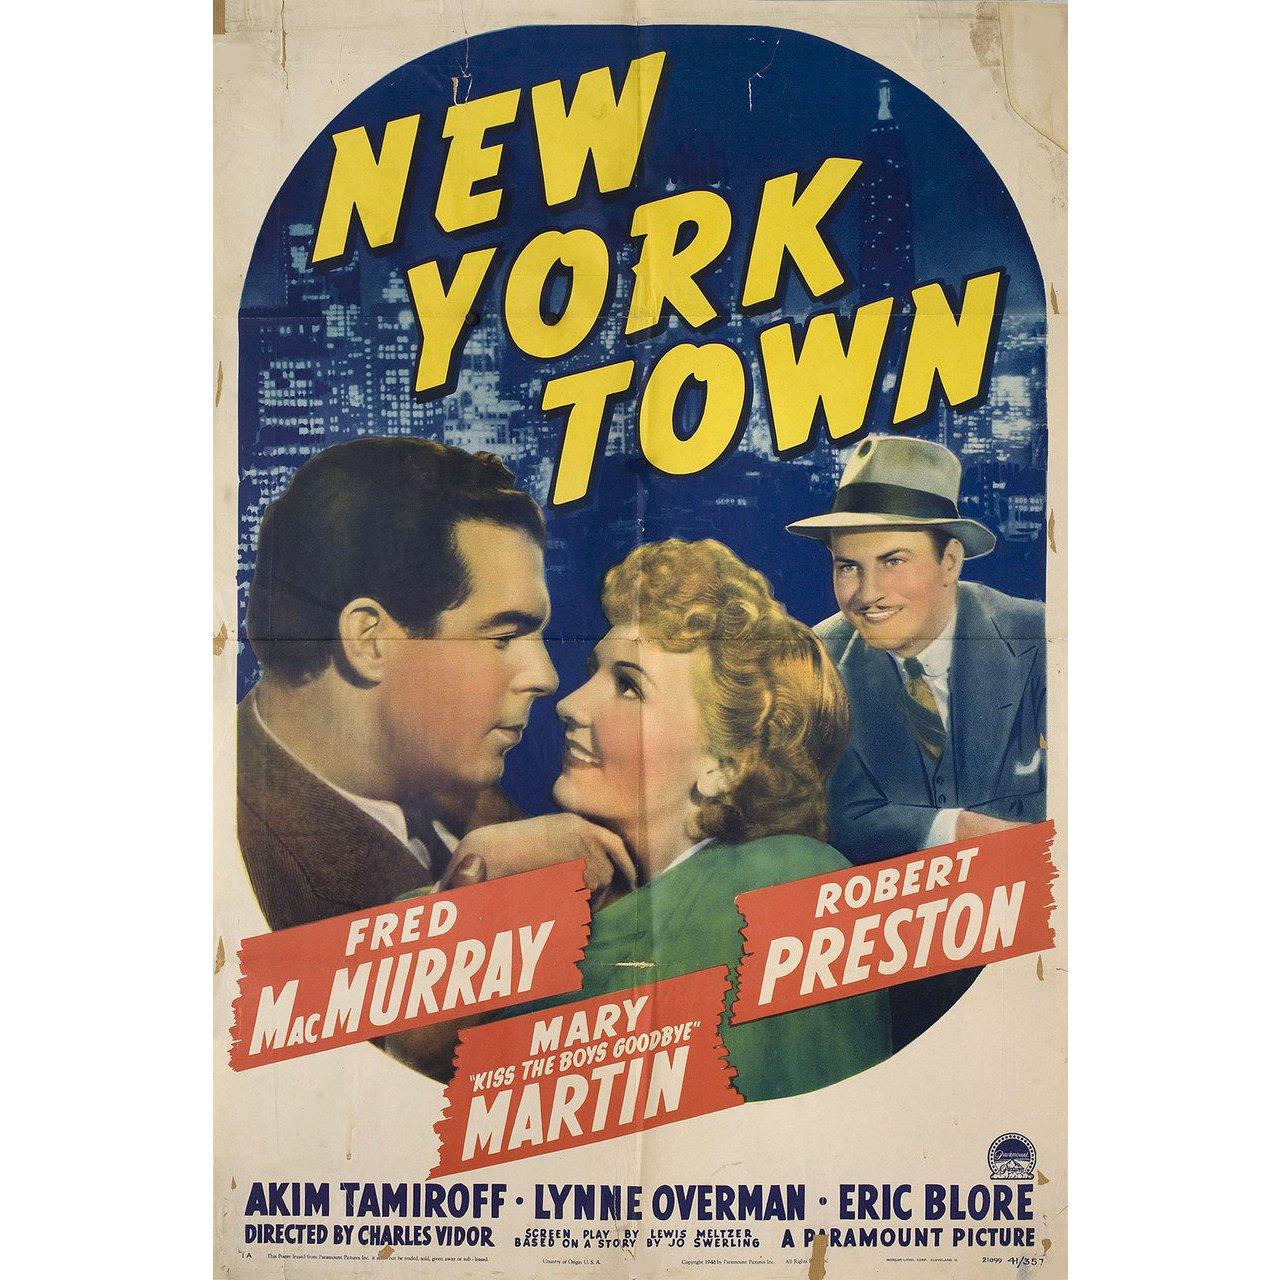 Original 1941 U.S. one sheet poster for the film New York Town directed by Charles Vidor with Fred MacMurray / Mary Martin / Akim Tamiroff / Robert Preston. Fair-good condition, folded with lots of tape on back. Many original posters were issued